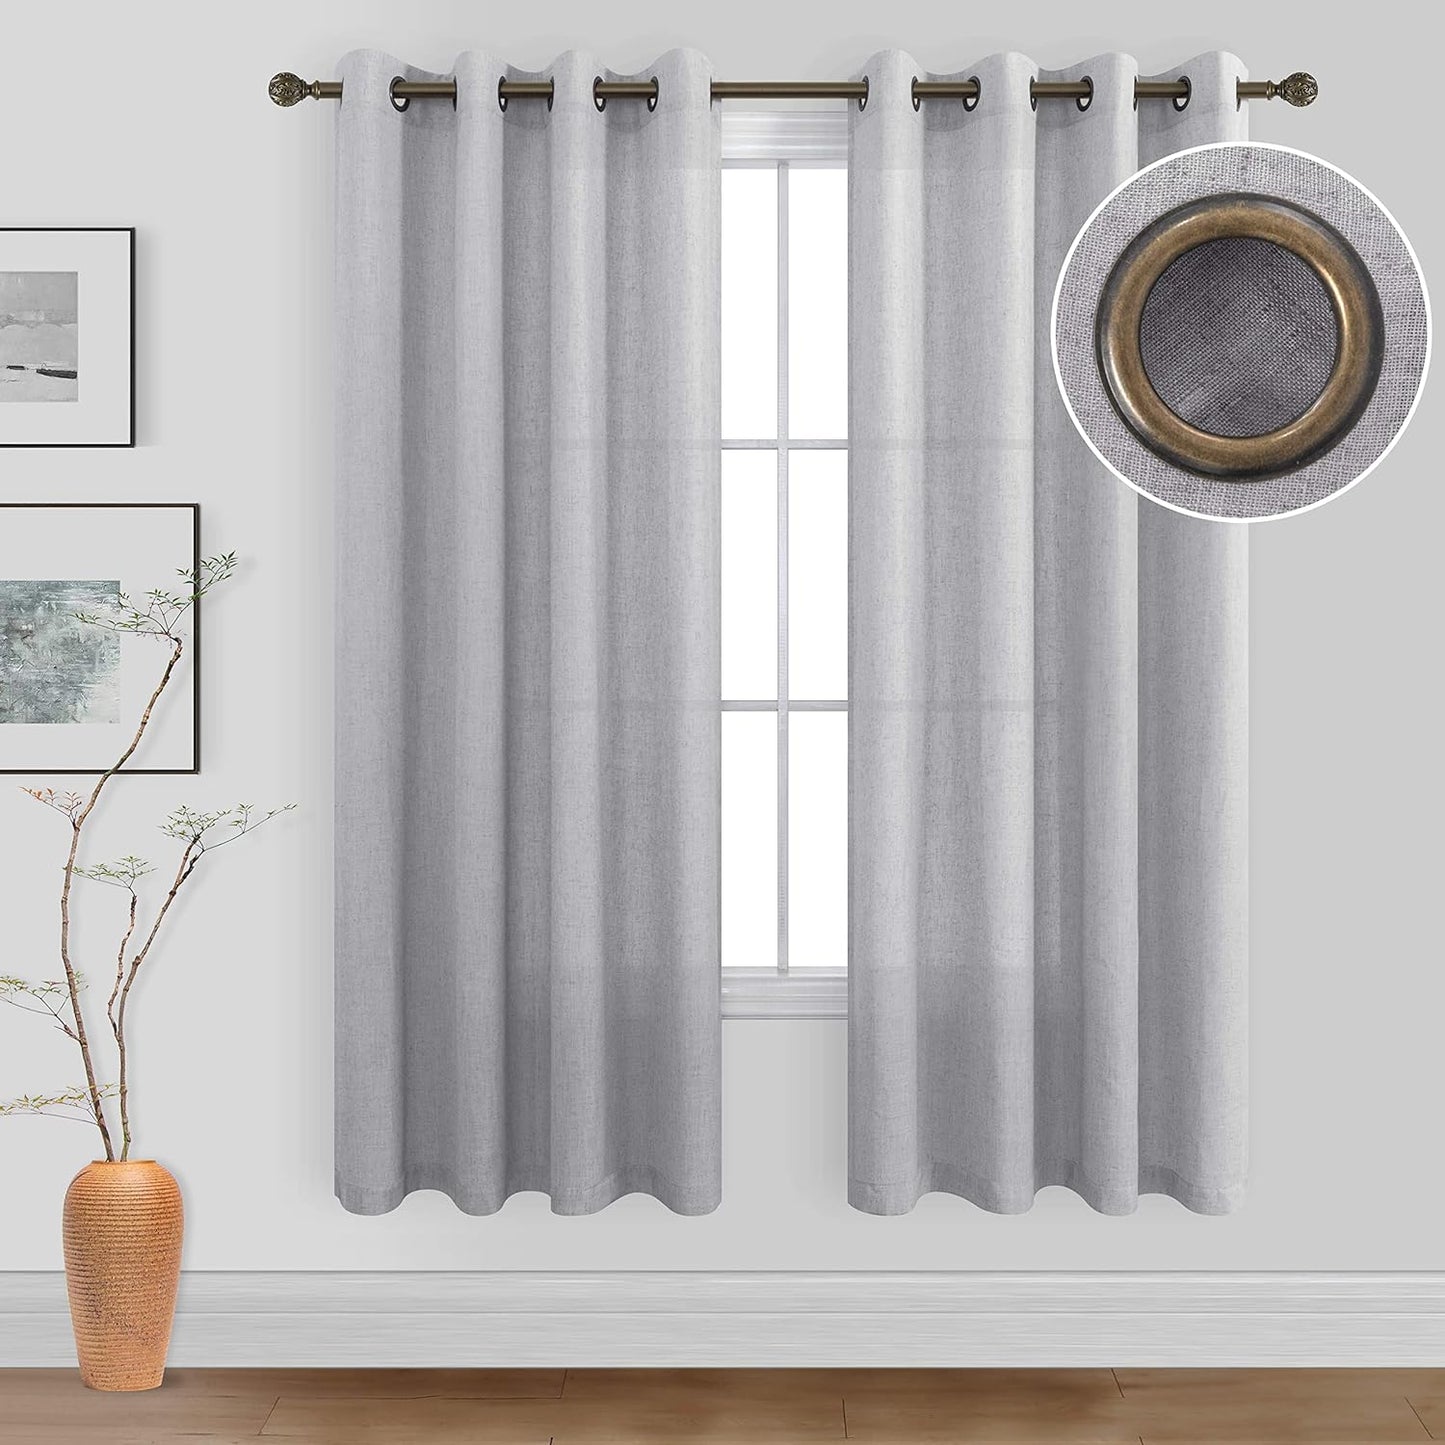 KOUFALL Beige Rustic Country Curtains for Living Room 84 Inches Long Flax Linen Bronze Grommet Tan Sand Color Solid Faux Linen Curtains for Bedroom Sliding Glass Patio Door 2 Panels  KOUFALL TEXTILE Grey 52X63 